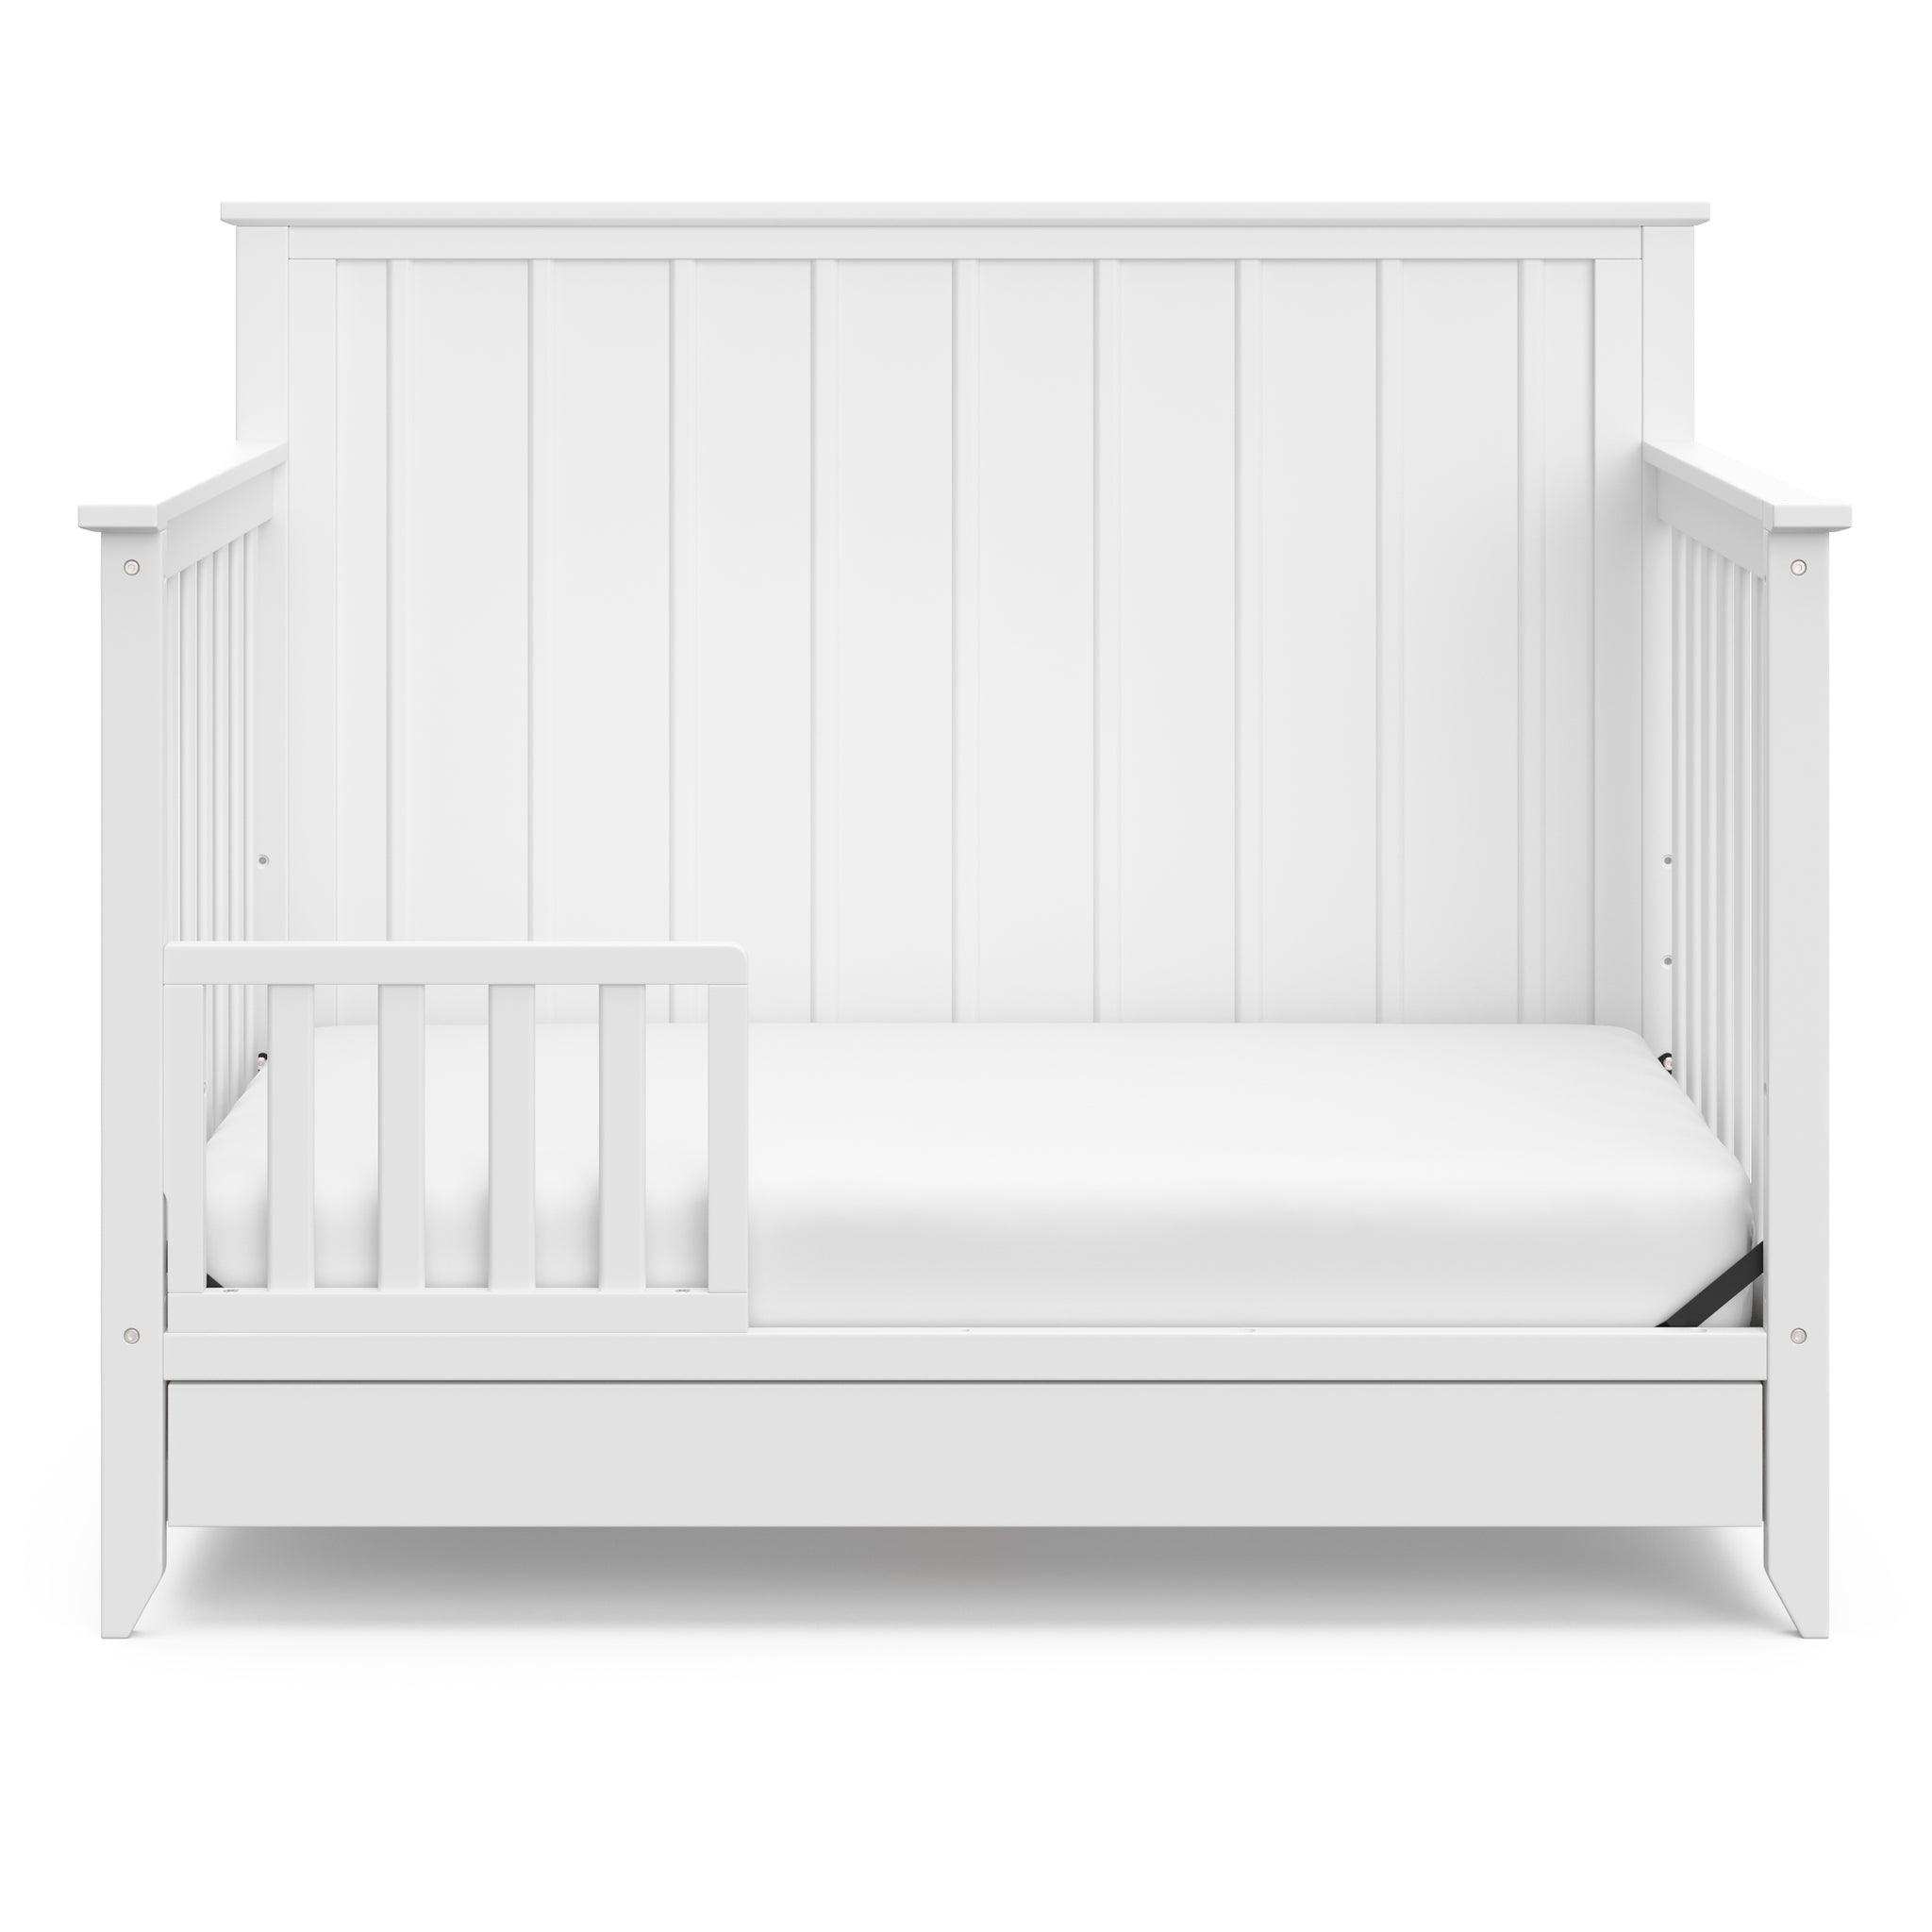 White crib in toddler bed conversion with one safety guardrail